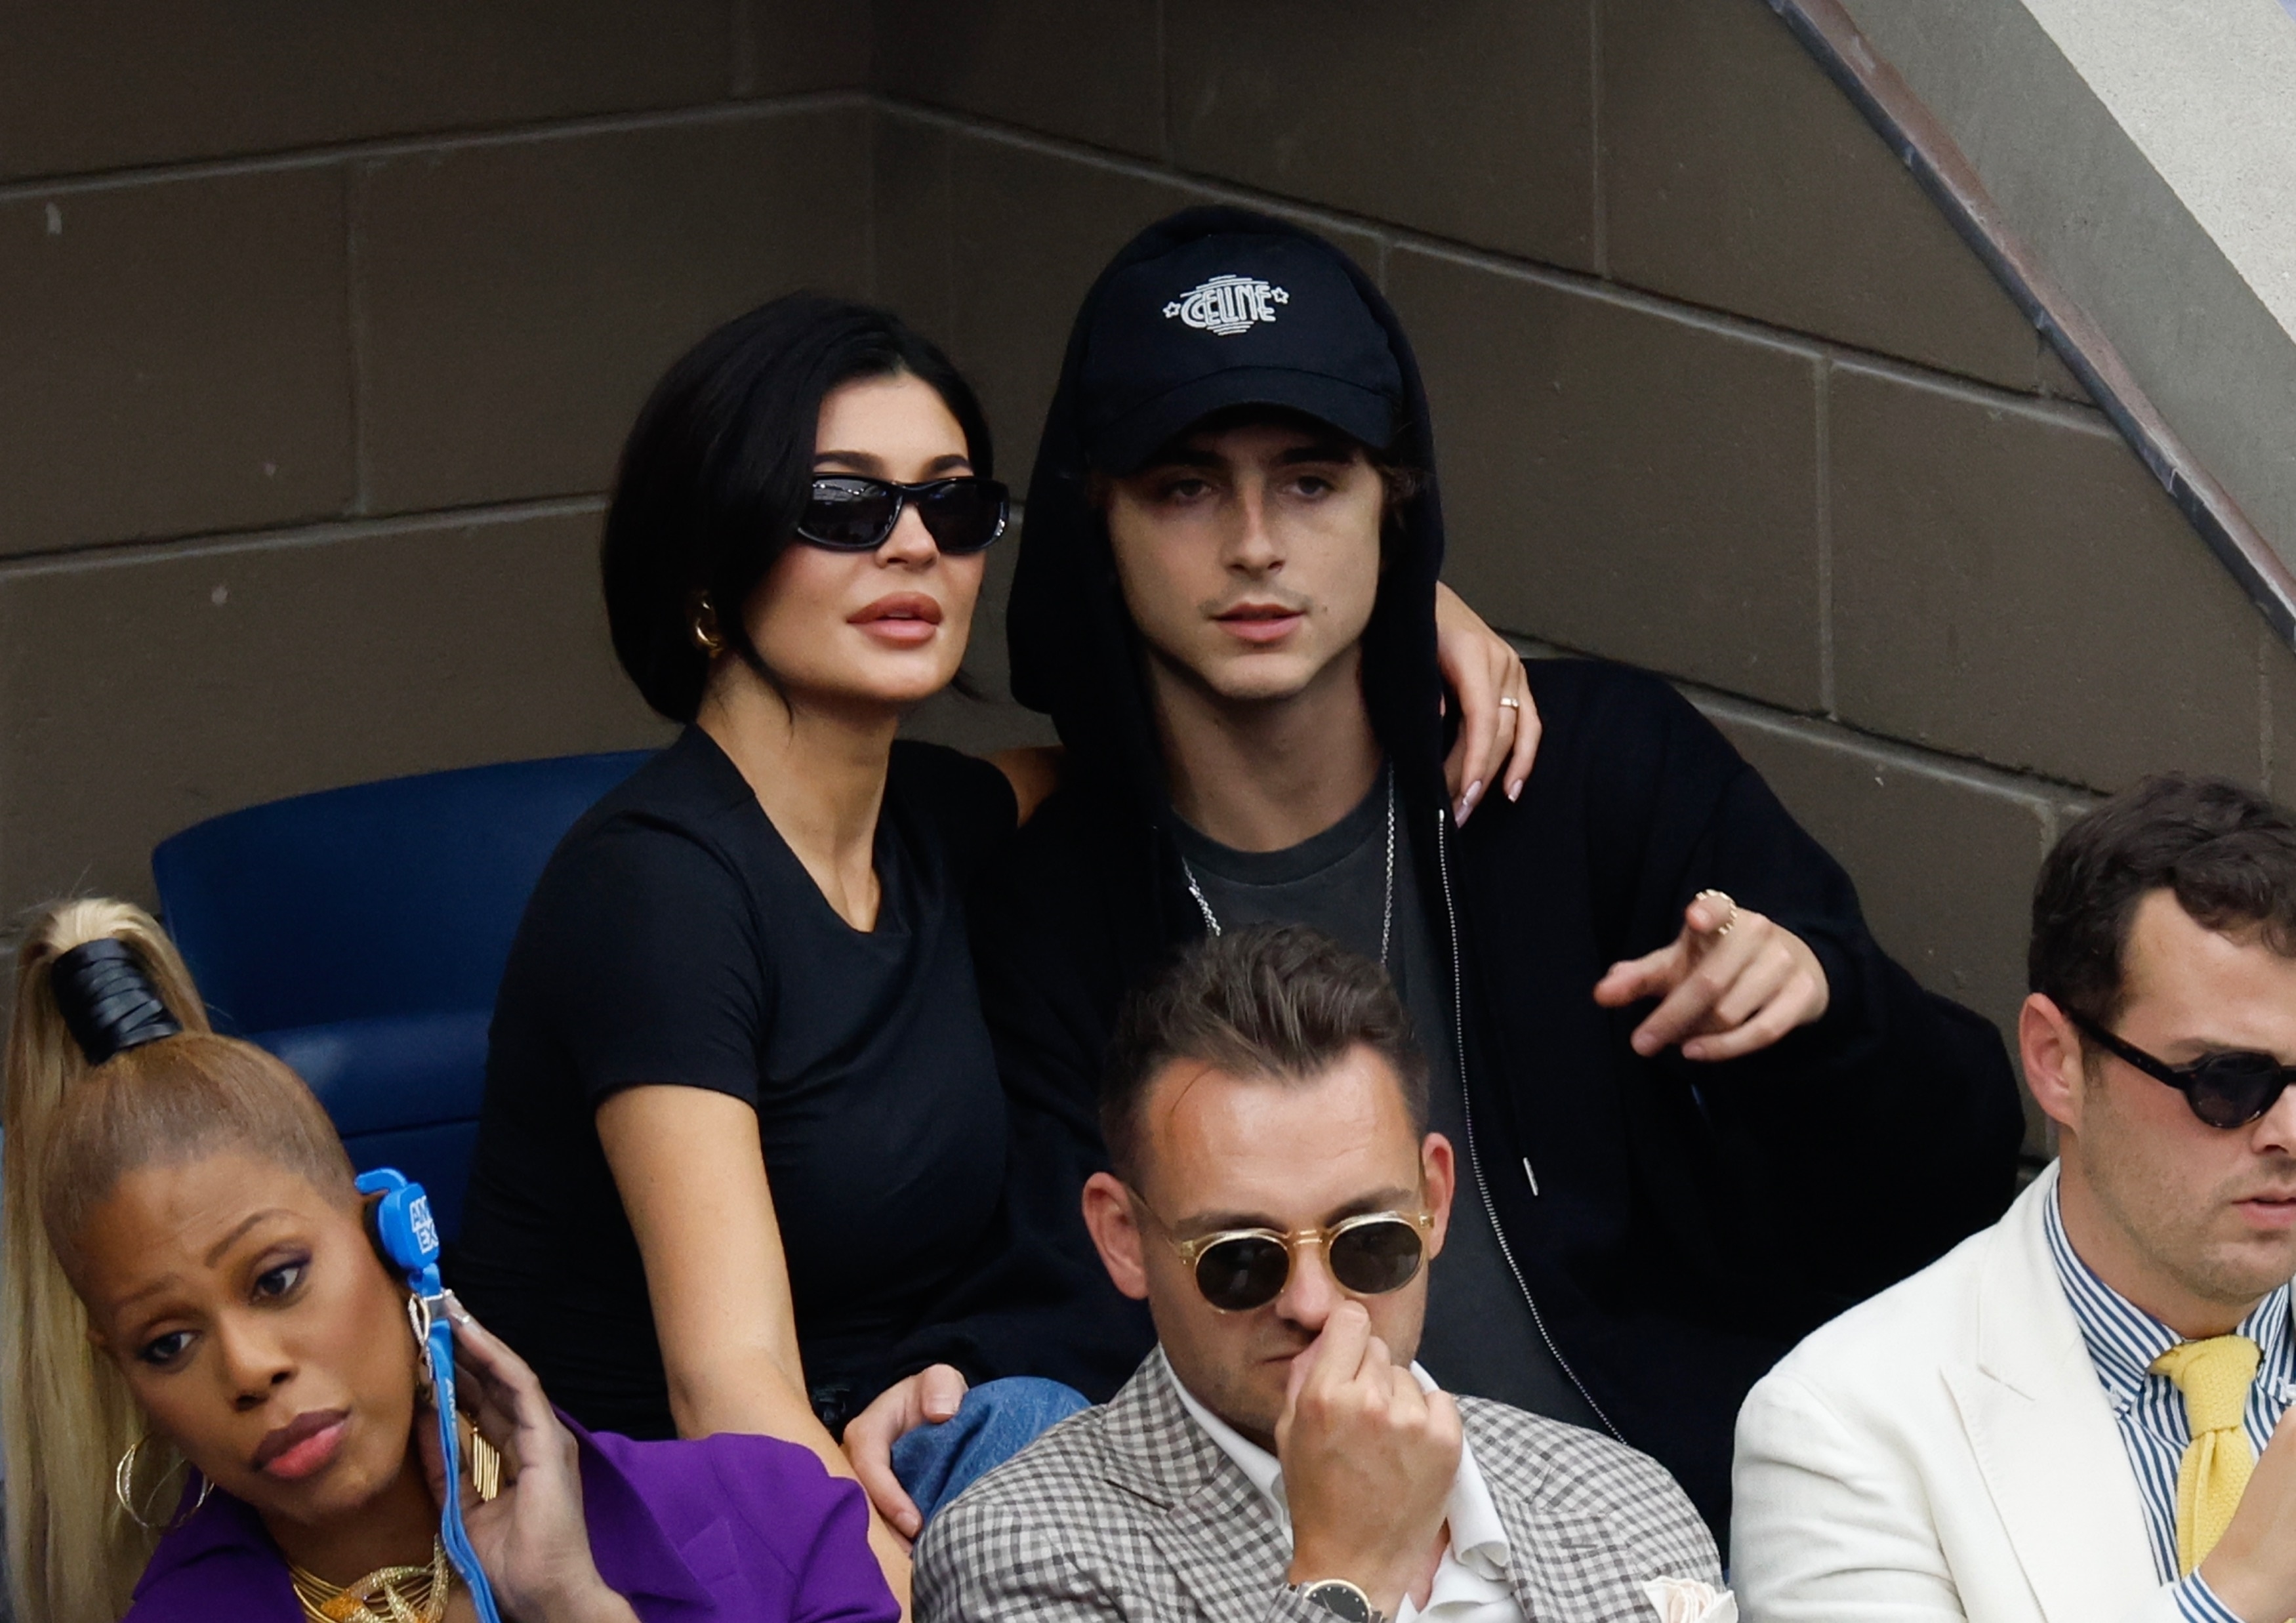 Kylie Jenner & Timothée Chalamet seen embracing each other in the stands of the US Open